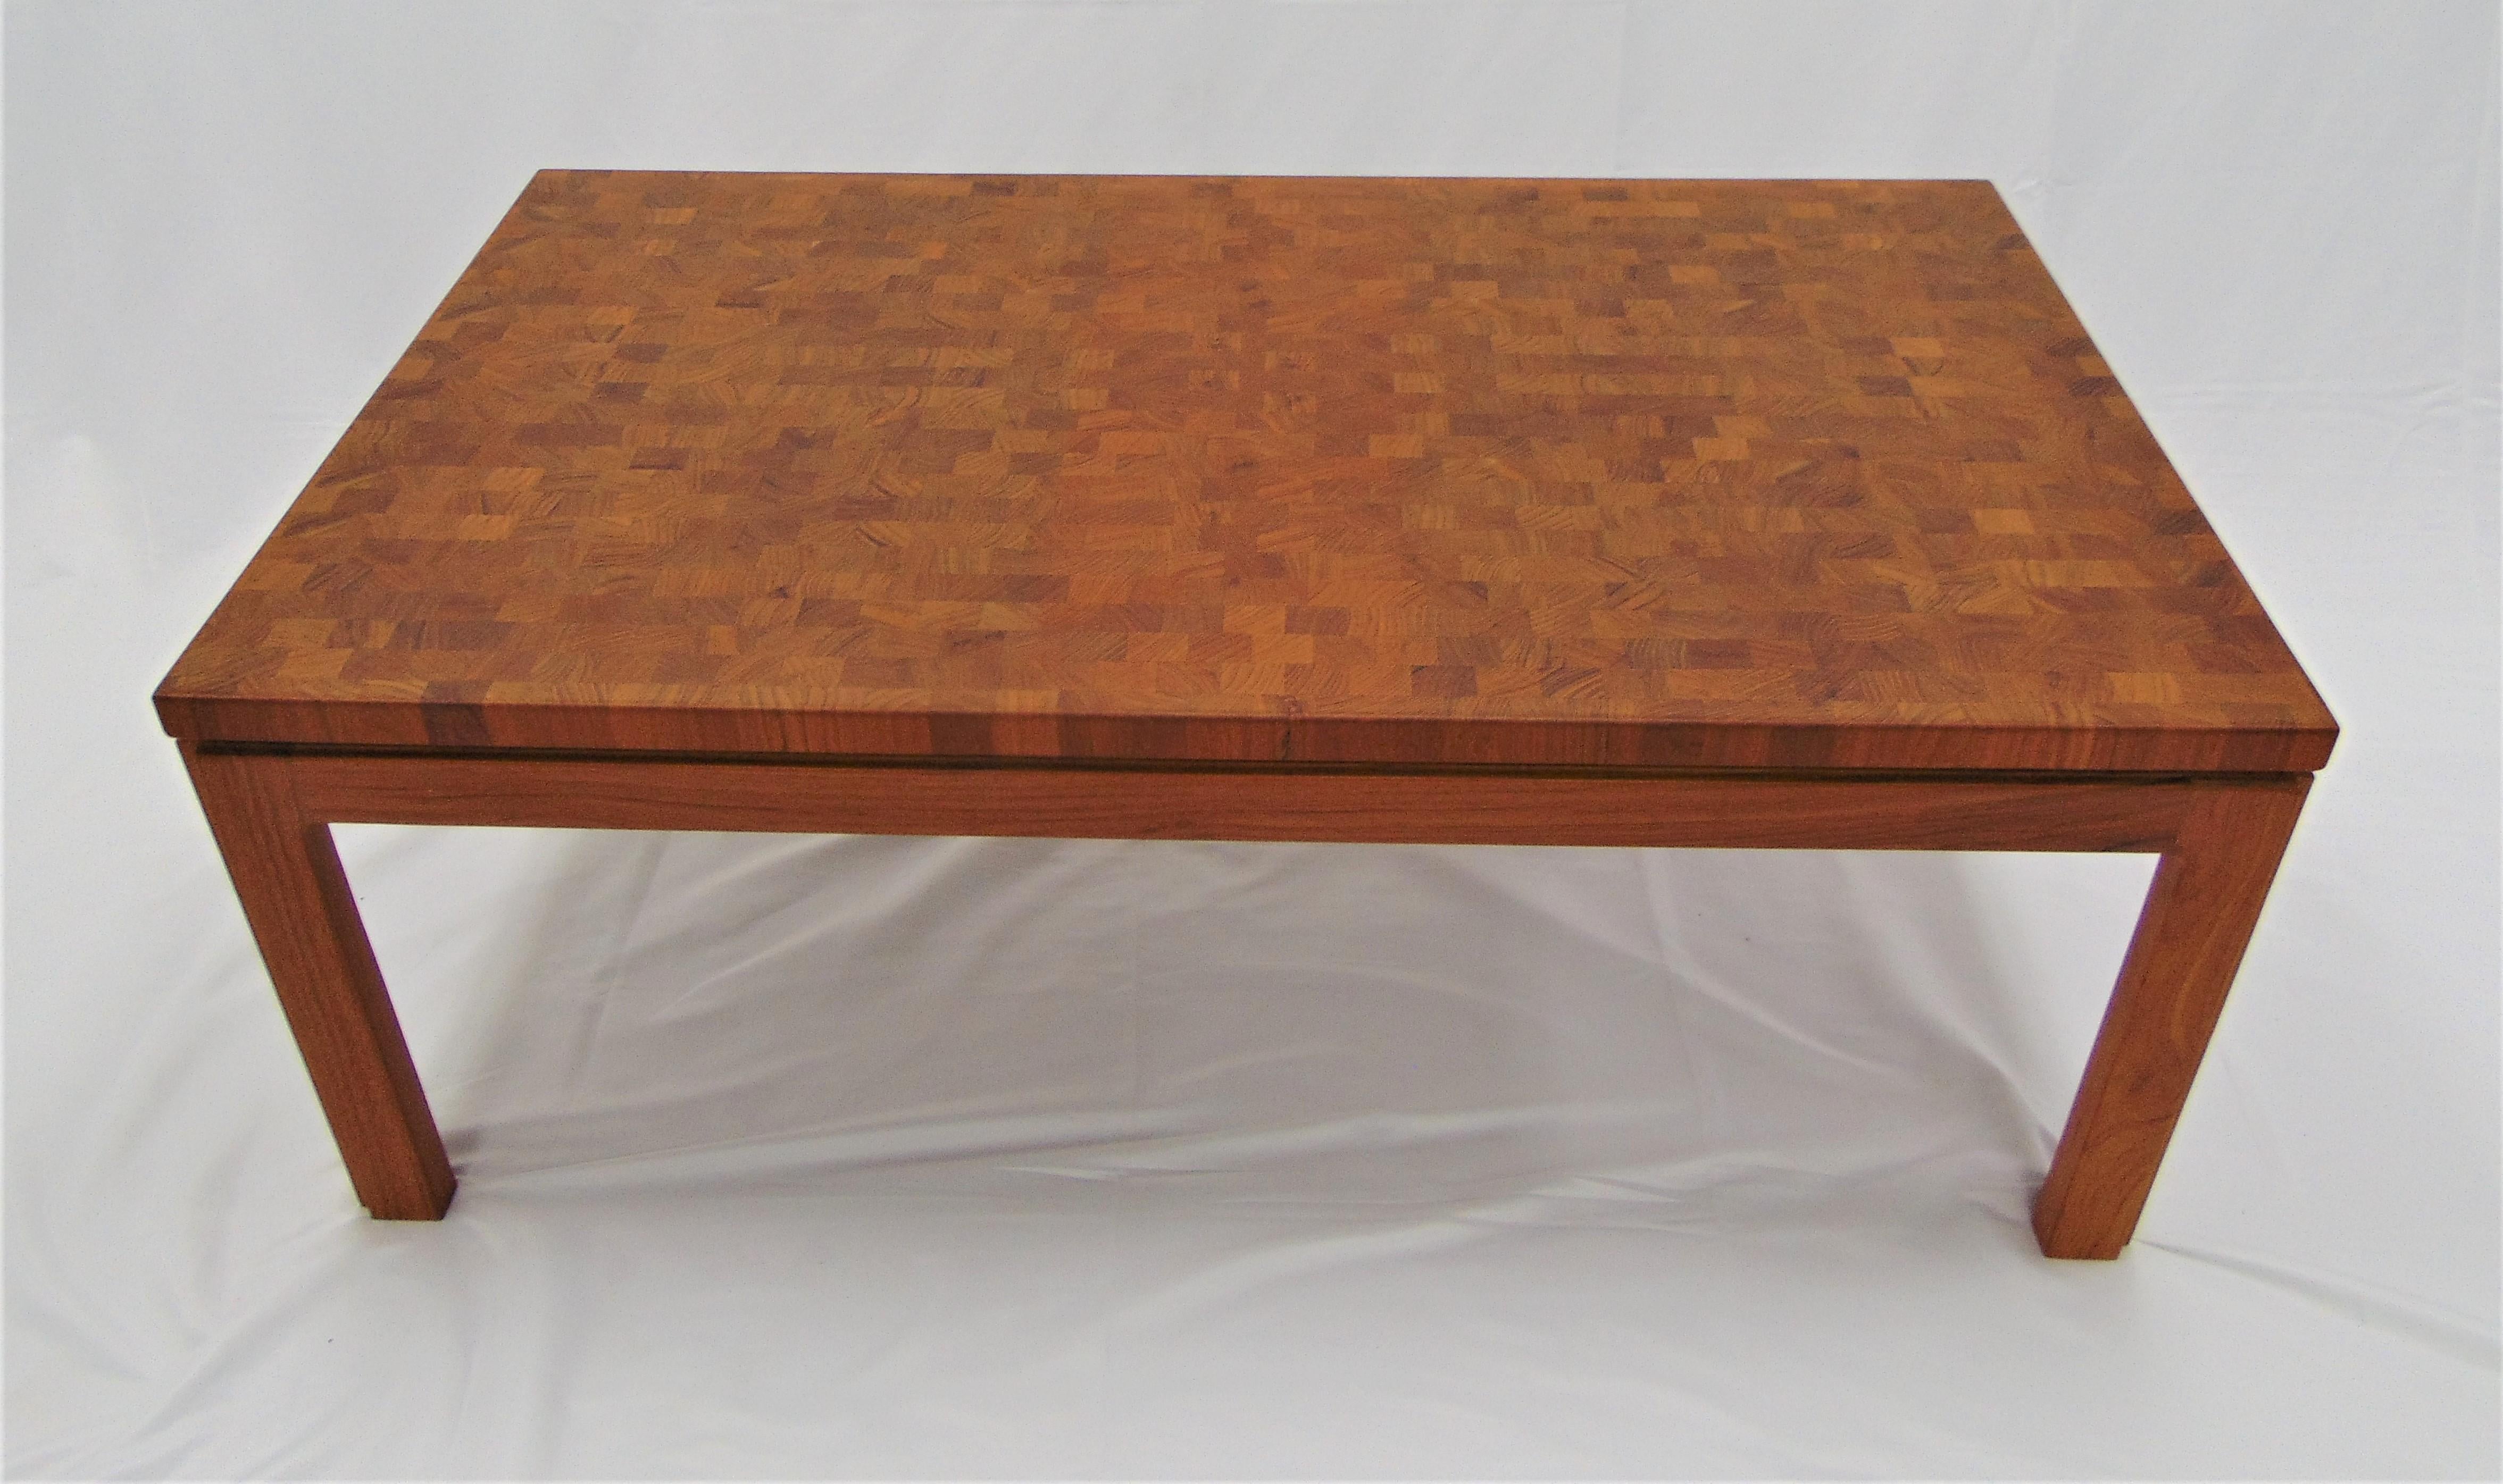 This is a beautiful and rare midcentury coffee table by Tarm Stole of Denmark. It is made of teak wood in a parquetry pattern. The overall condition is great but there is a discoloration in the middle of the table where it is appears more